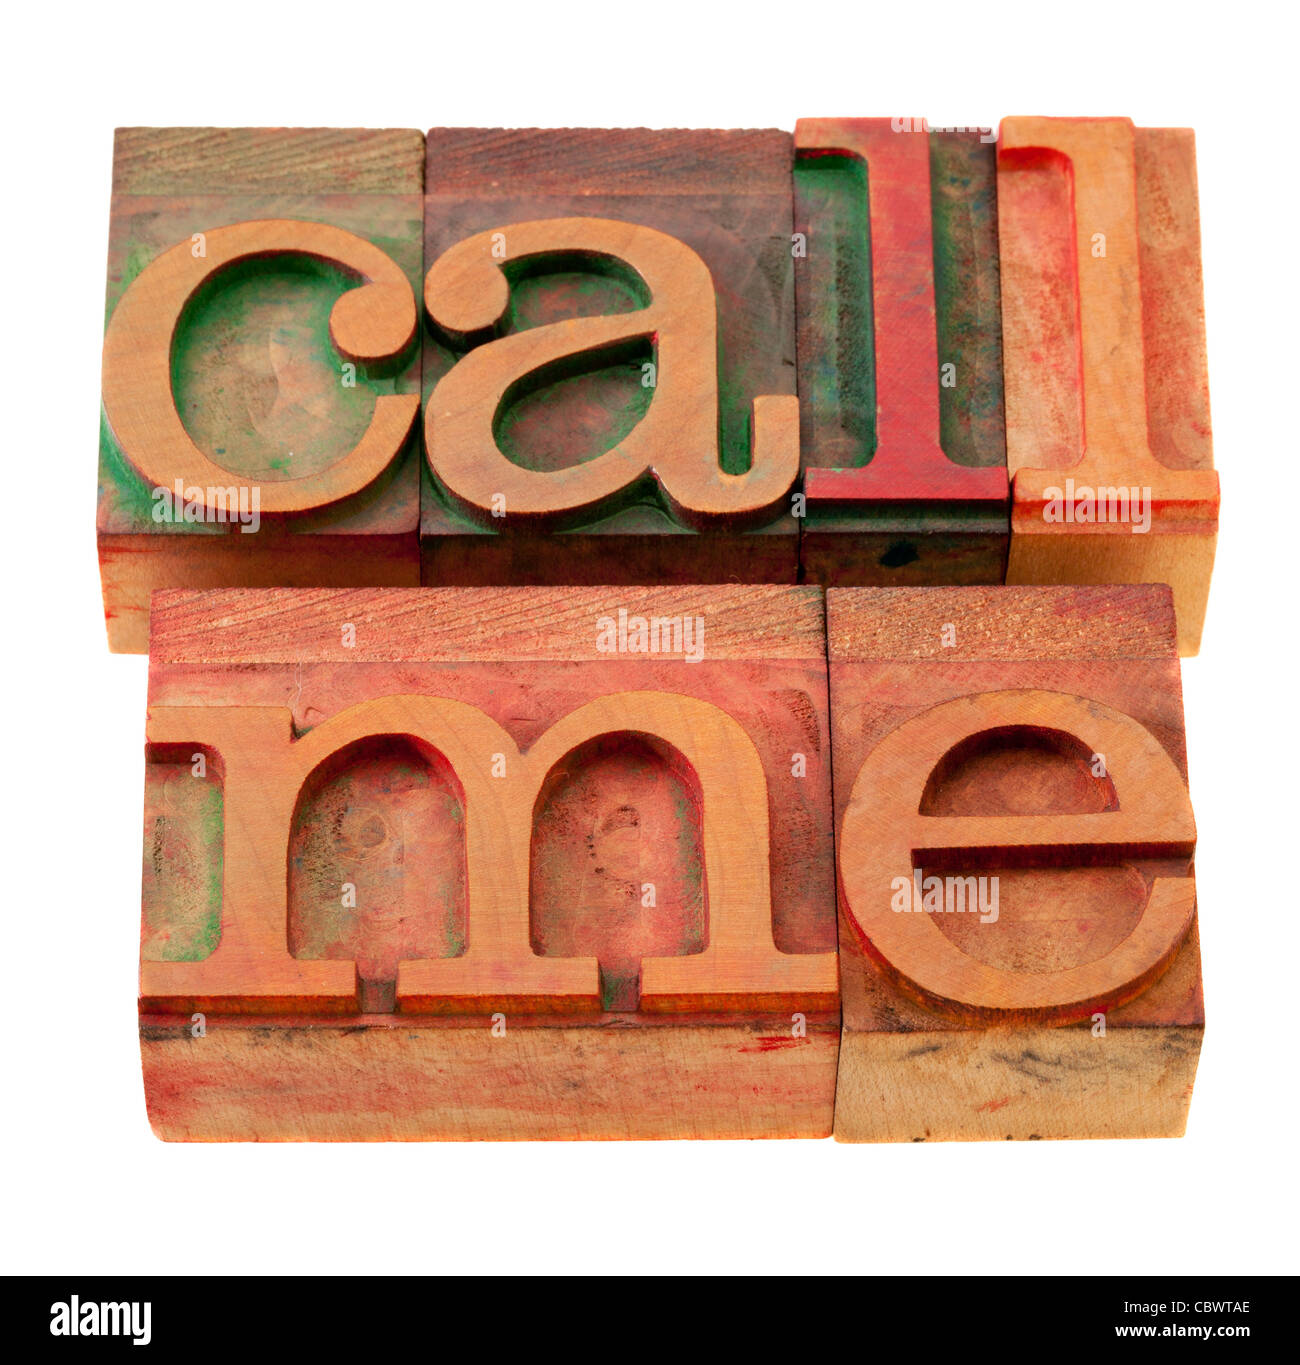 call me request or reminder - words in vintage wooden letterpress printing blocks, stained by color inks, isolated on white Stock Photo